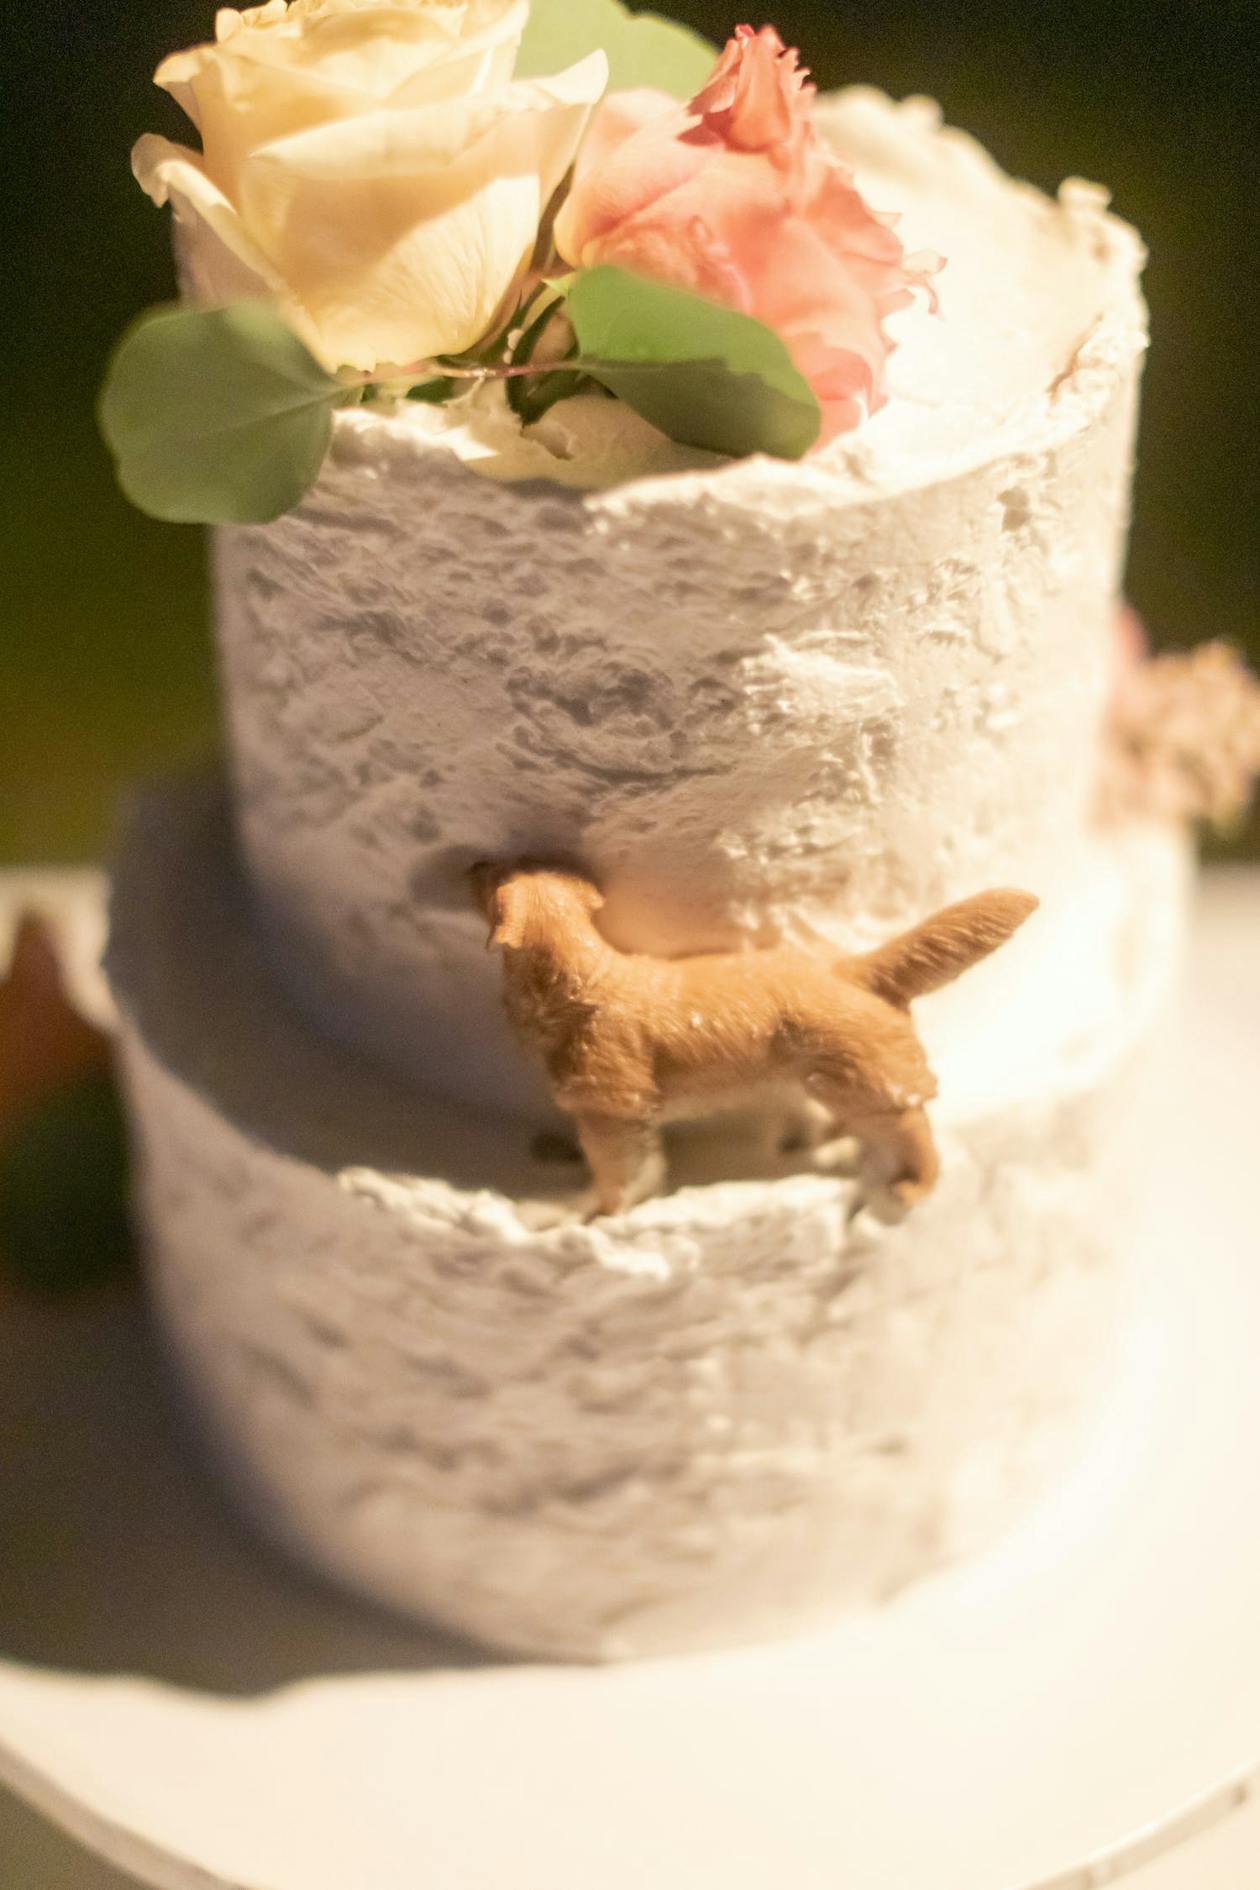 white wedding cake with dog figure standing on tier | PartySlate